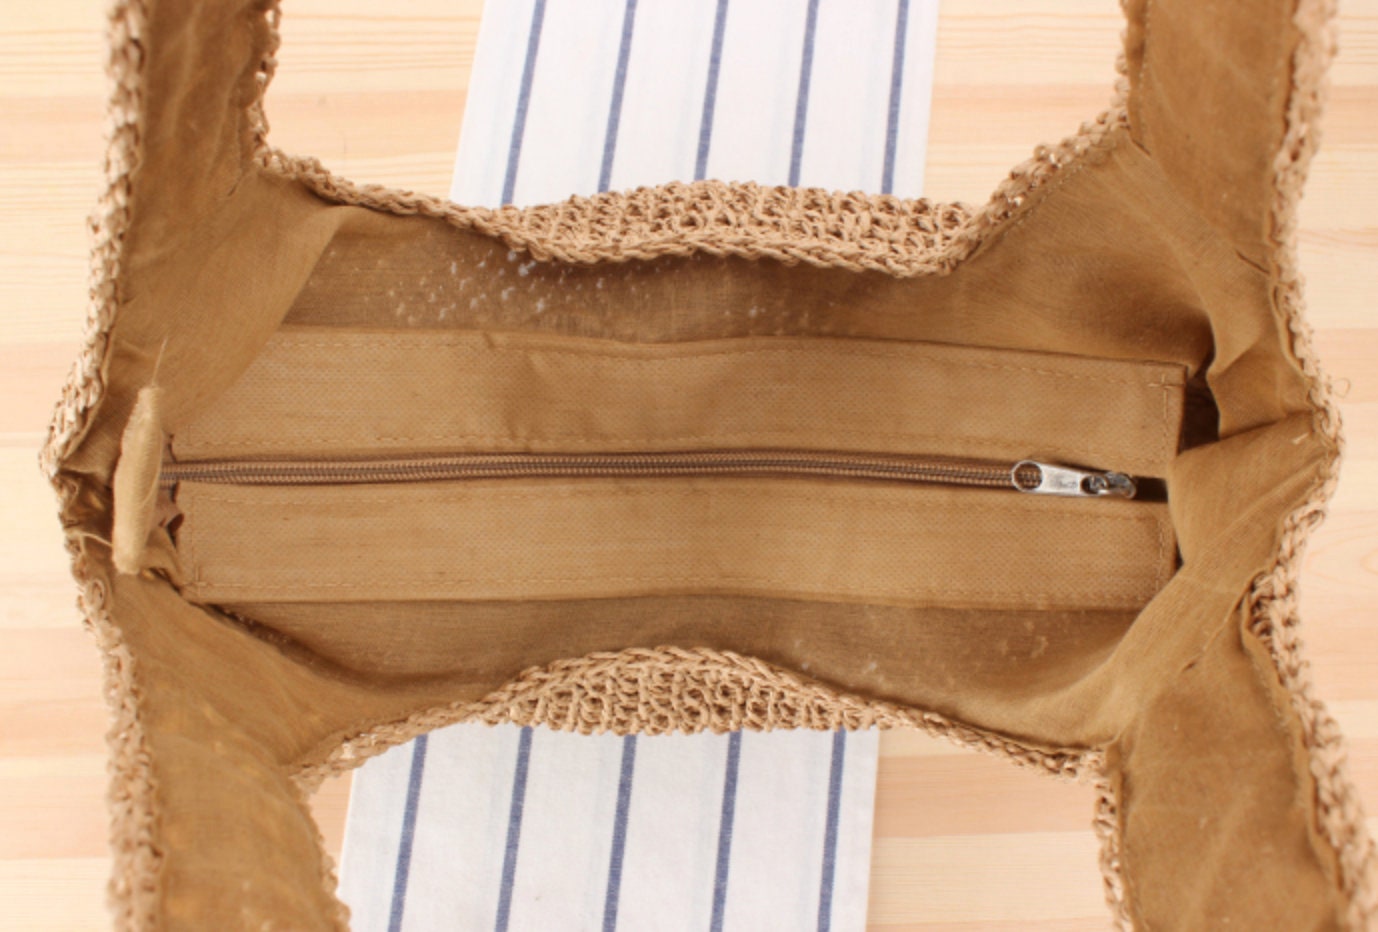 Interior zipper of the summer bag to protect personal items 